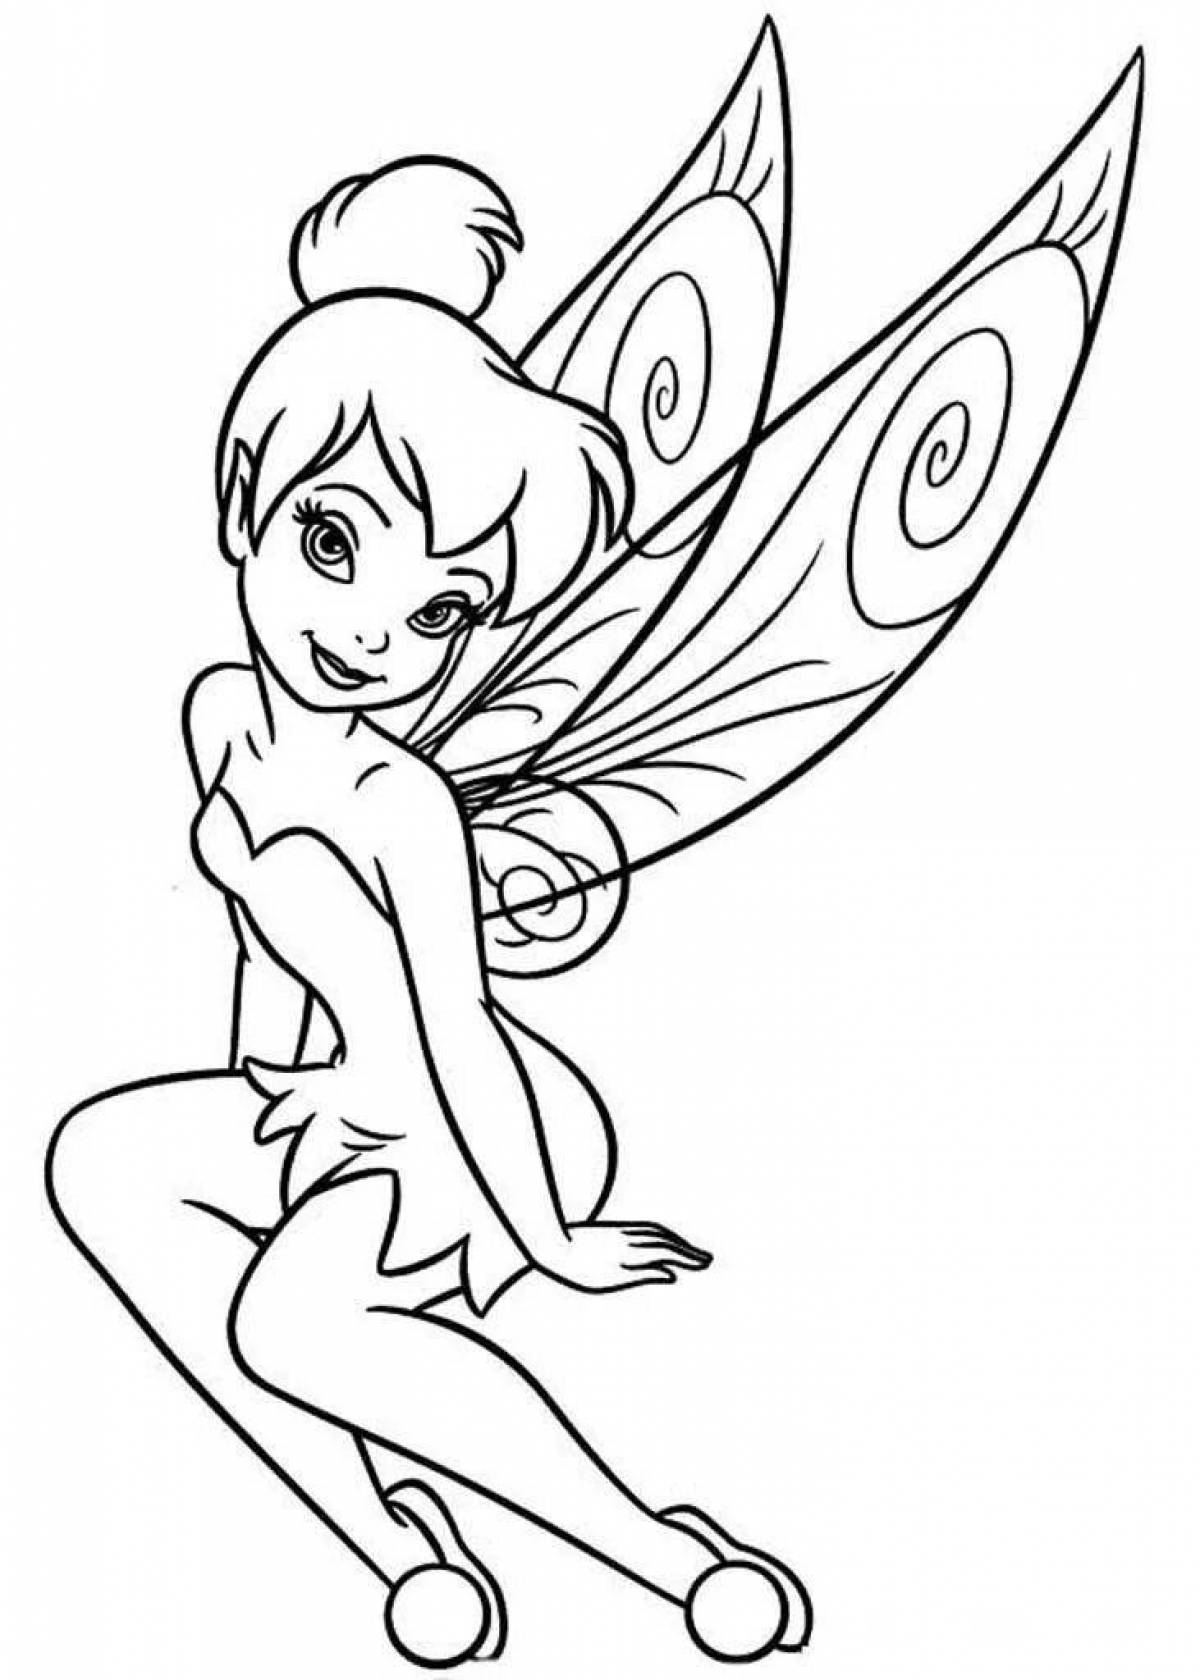 Exalted fairy ding coloring page